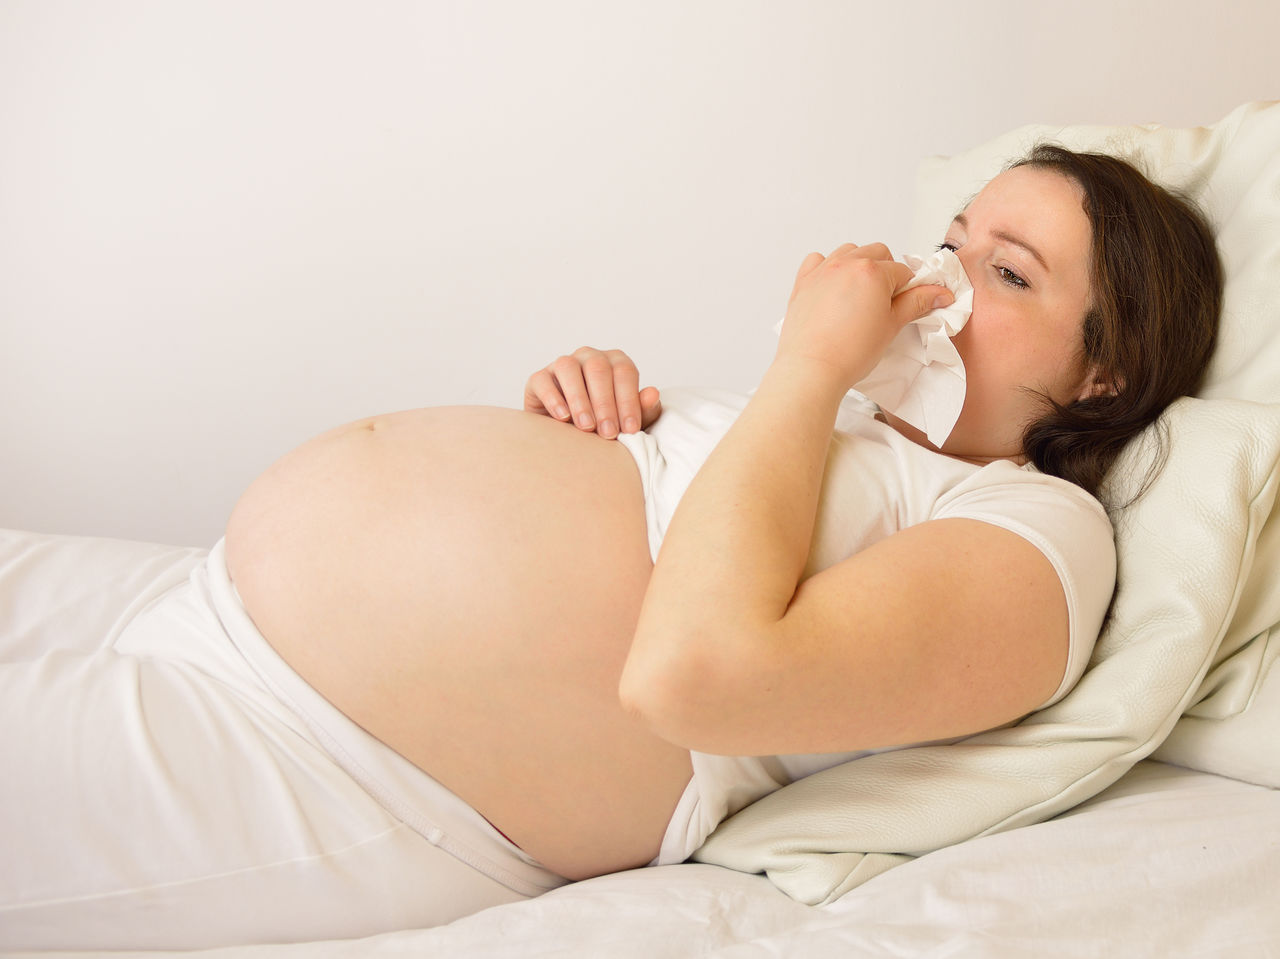 Pregnant woman with cough on the bed in her room